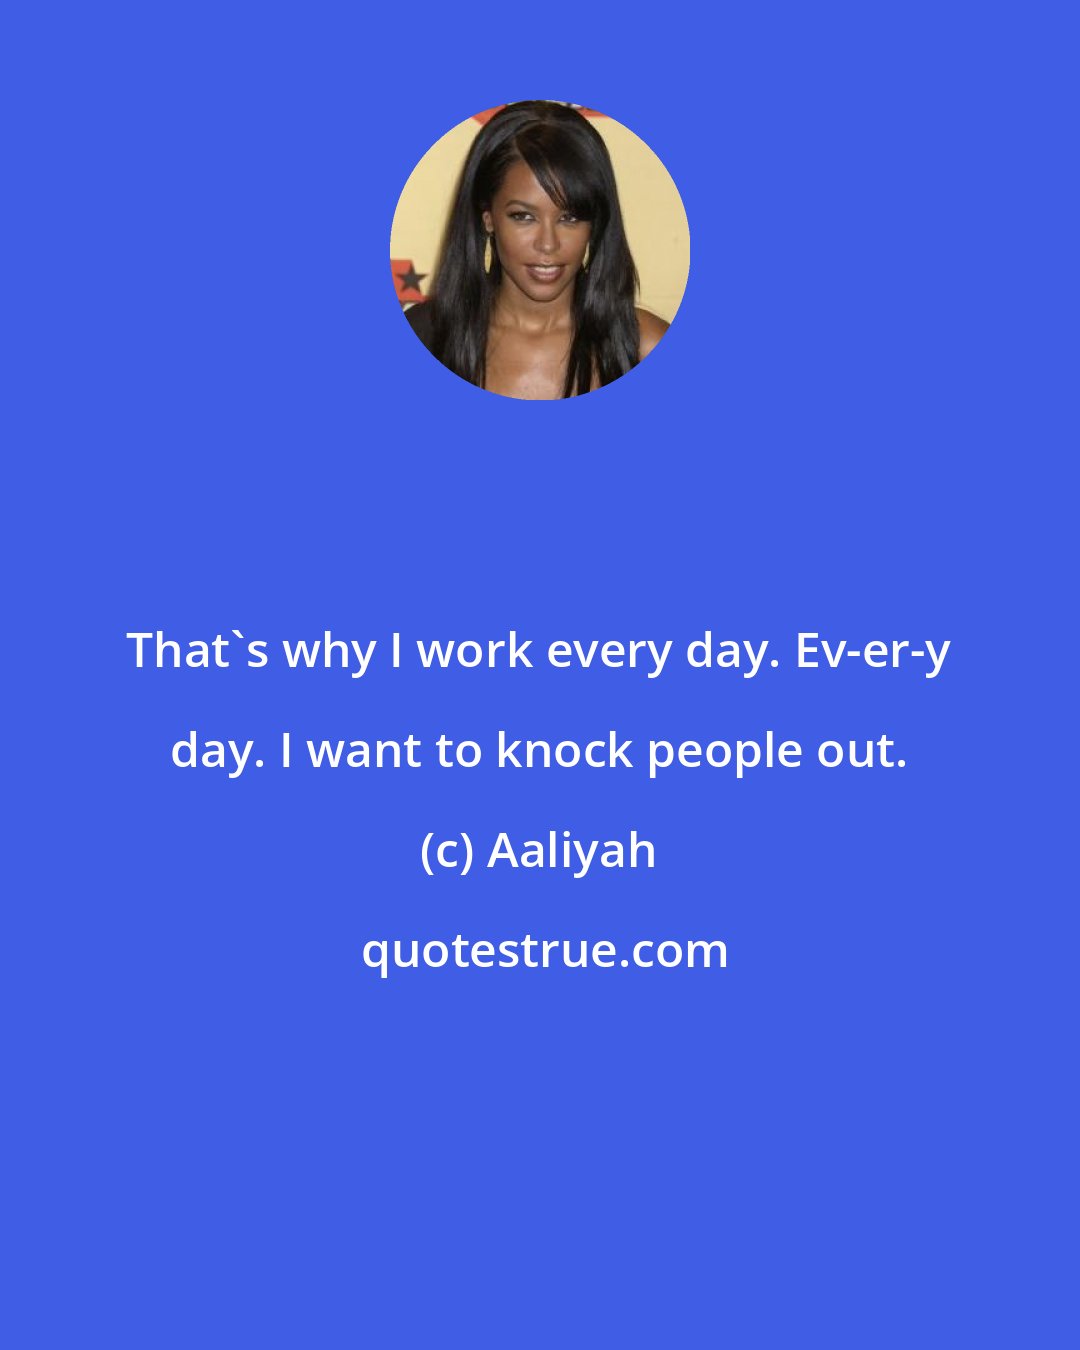 Aaliyah: That's why I work every day. Ev-er-y day. I want to knock people out.